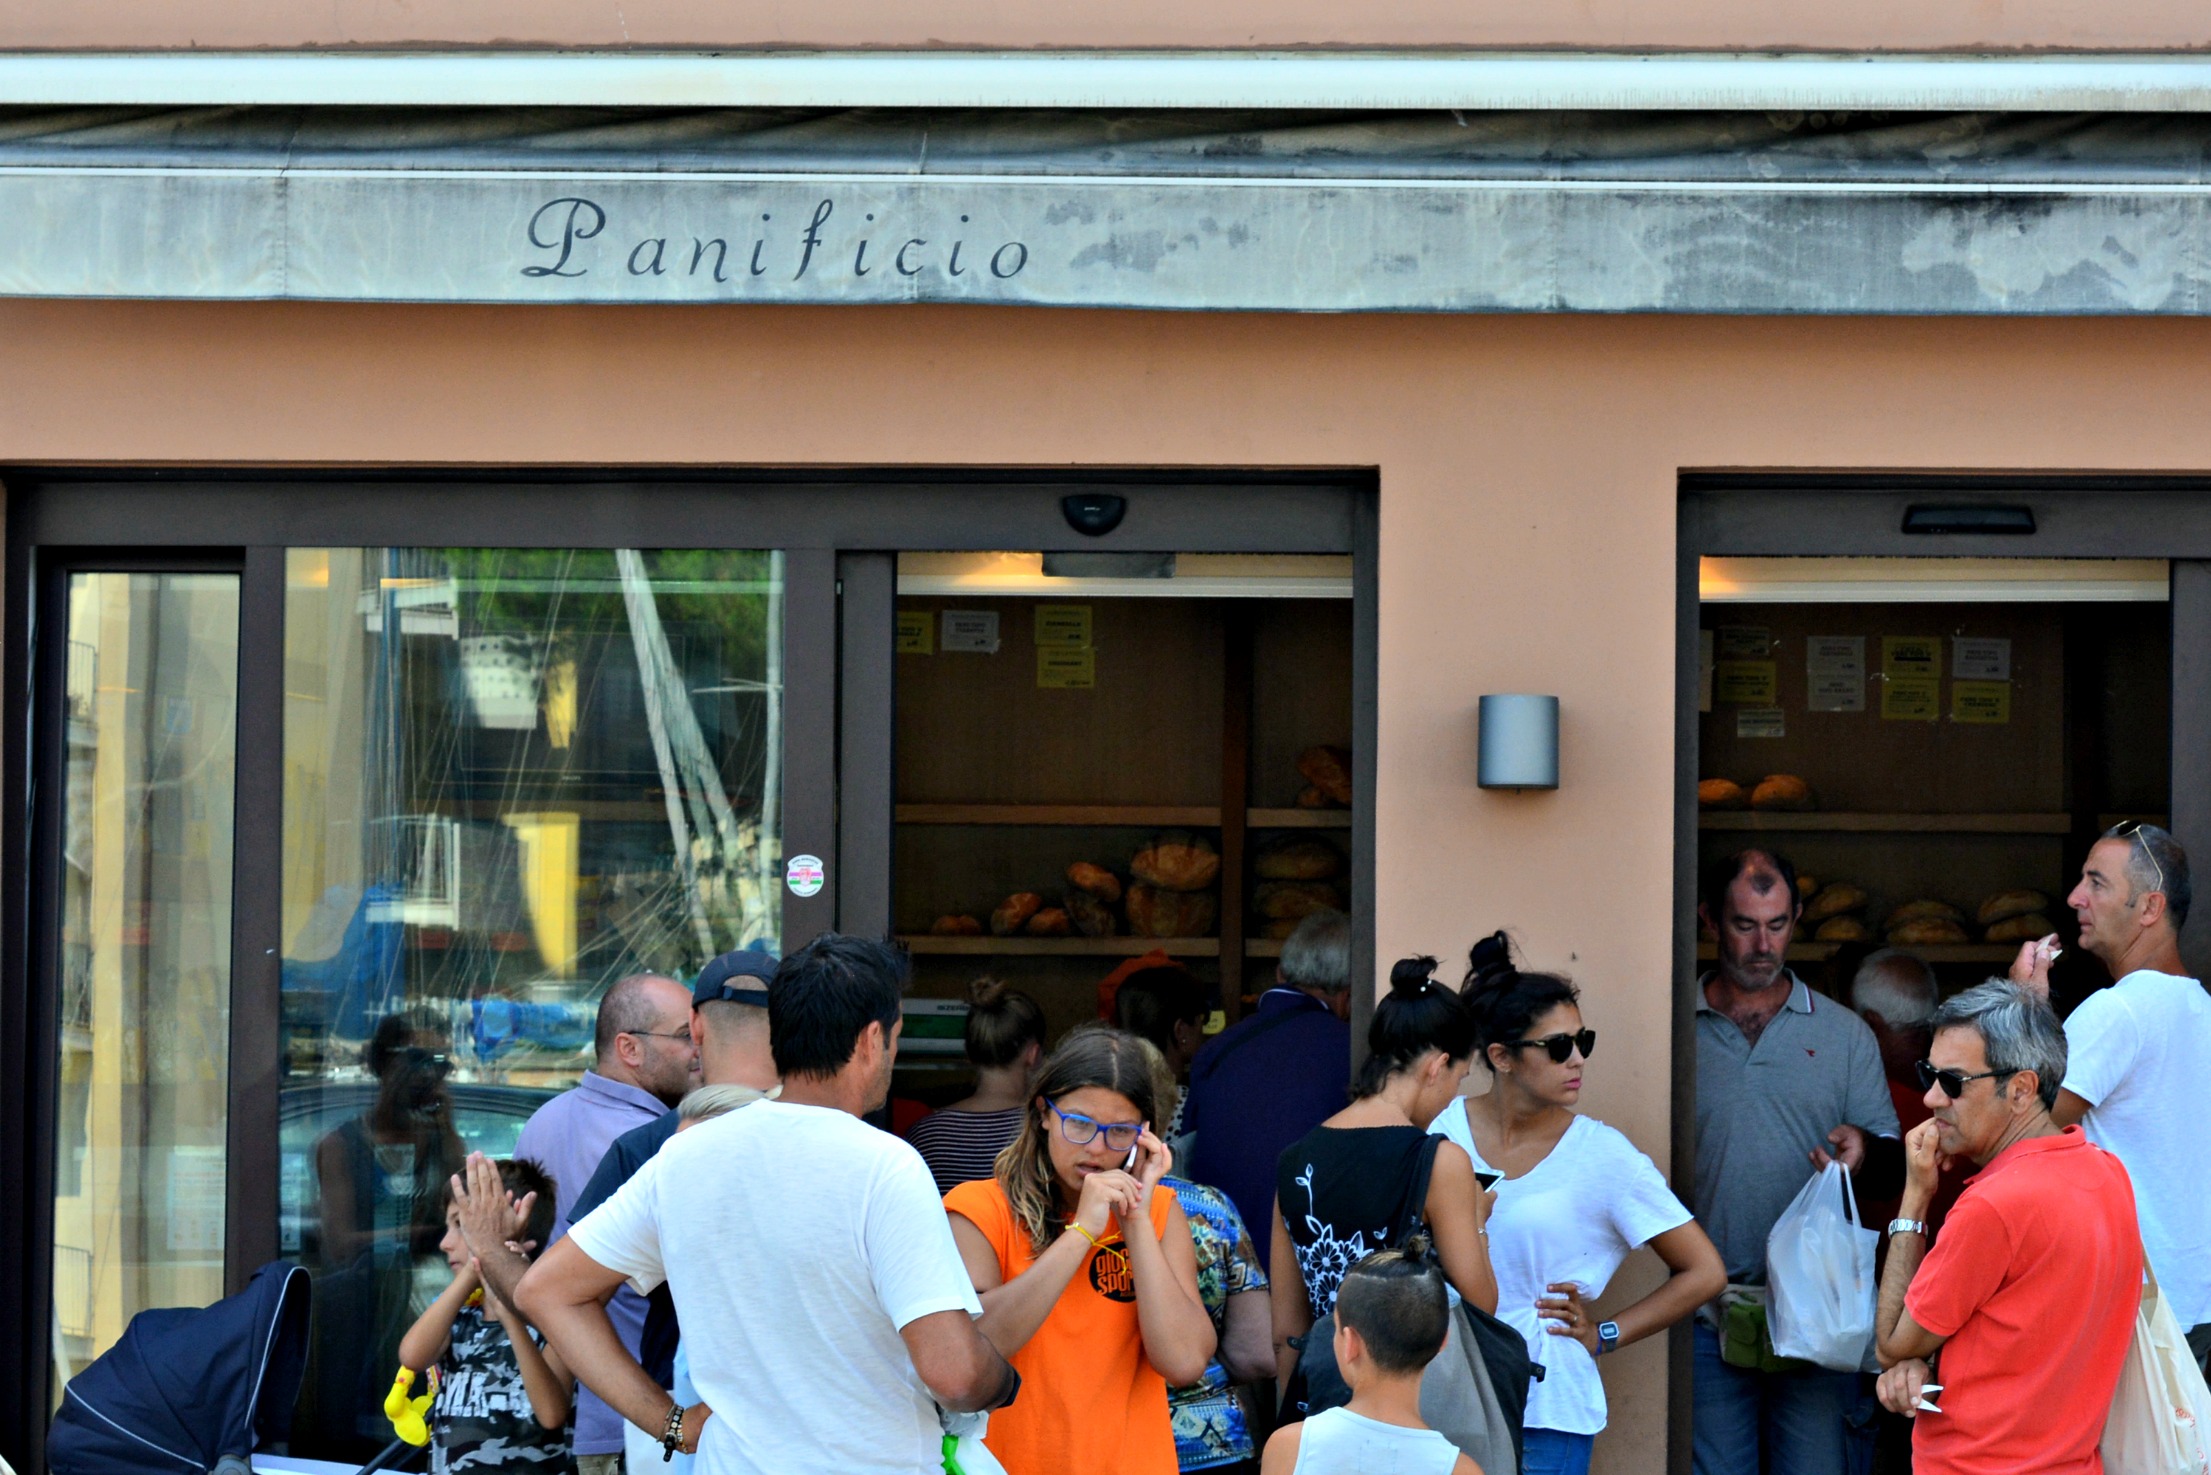 Panificio the popular Bakery in Cervia - Bikes & Boats on The Adriatic